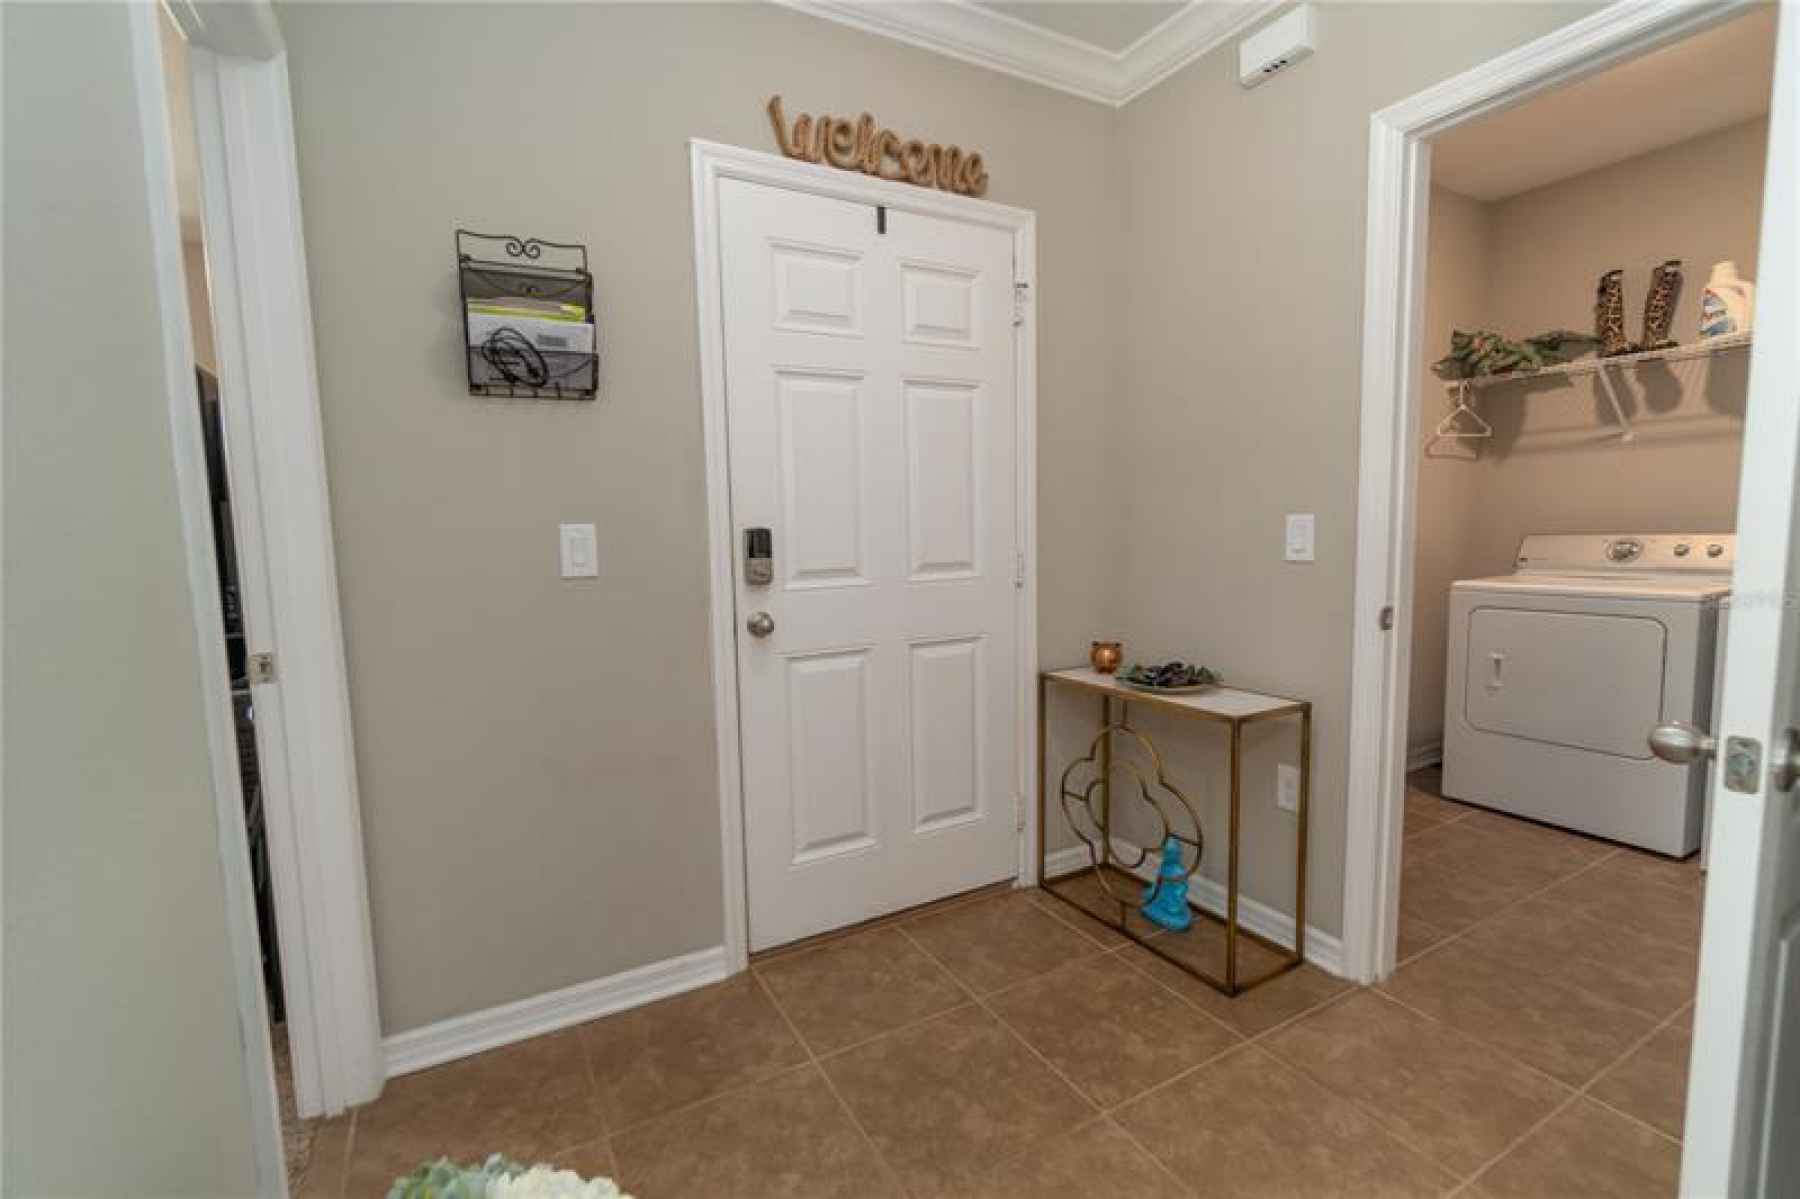 Entrance Door with Laundry Room on the Right.